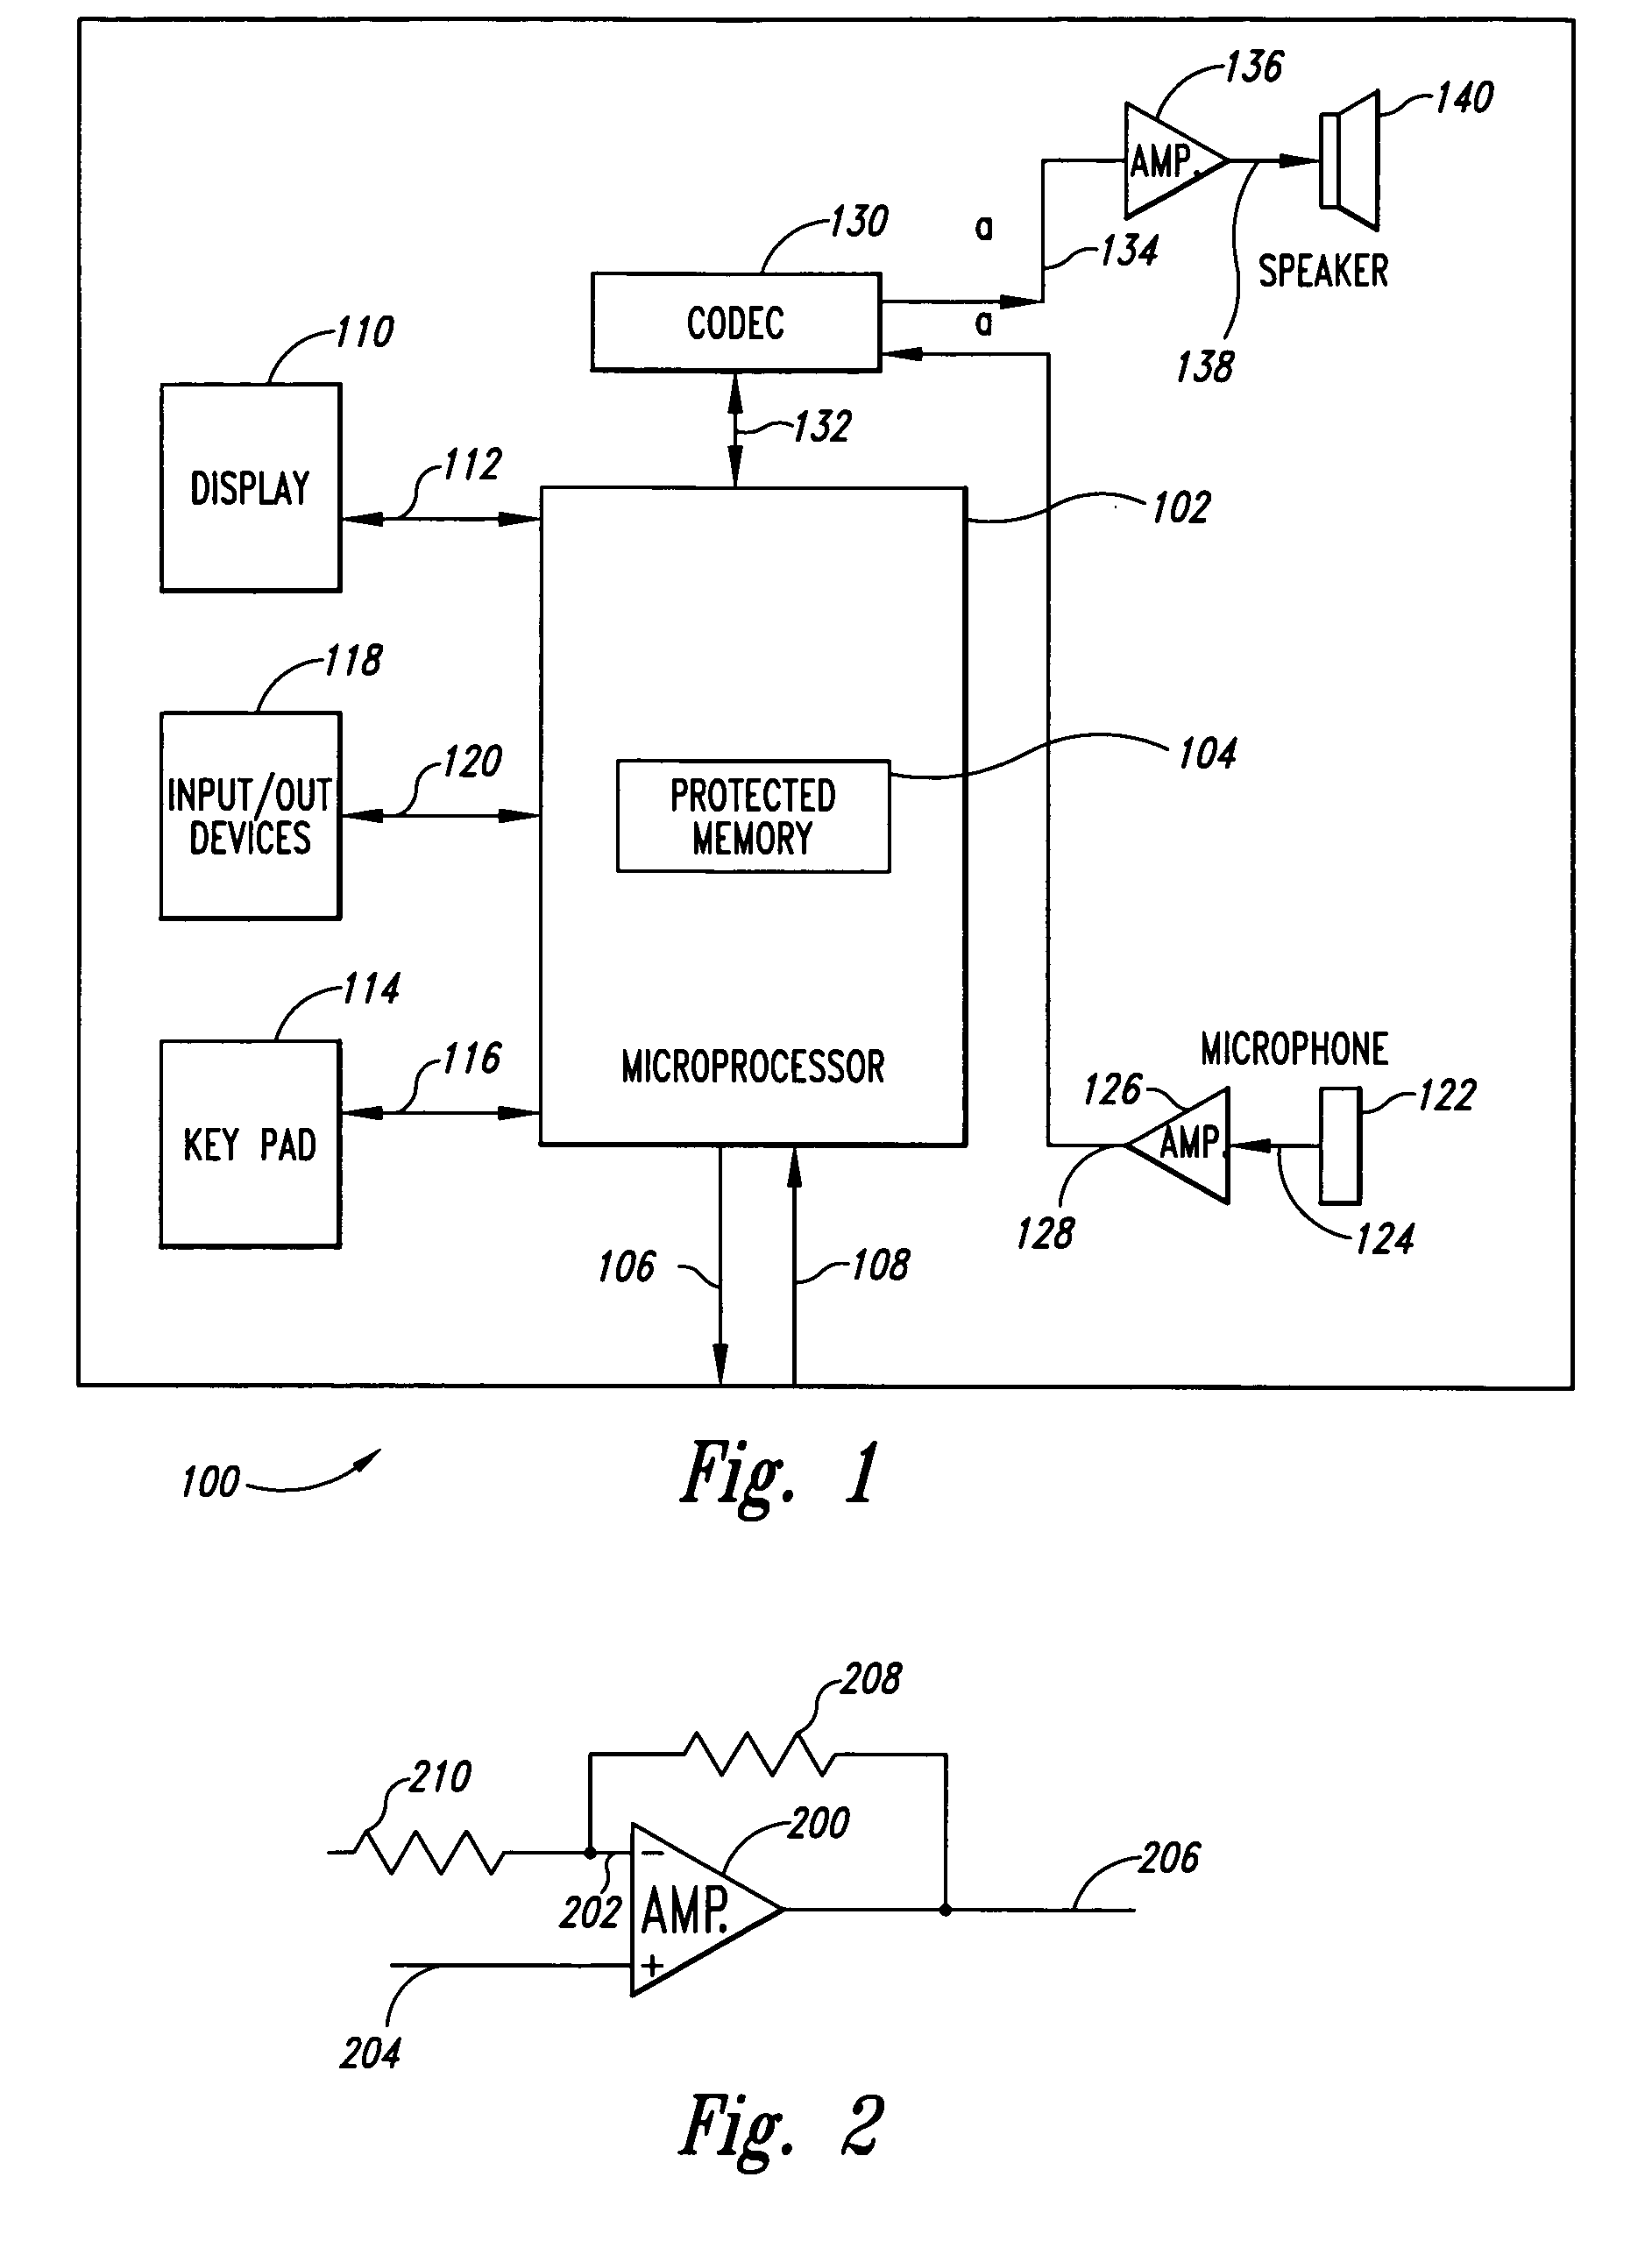 Low-power hand-held transaction device